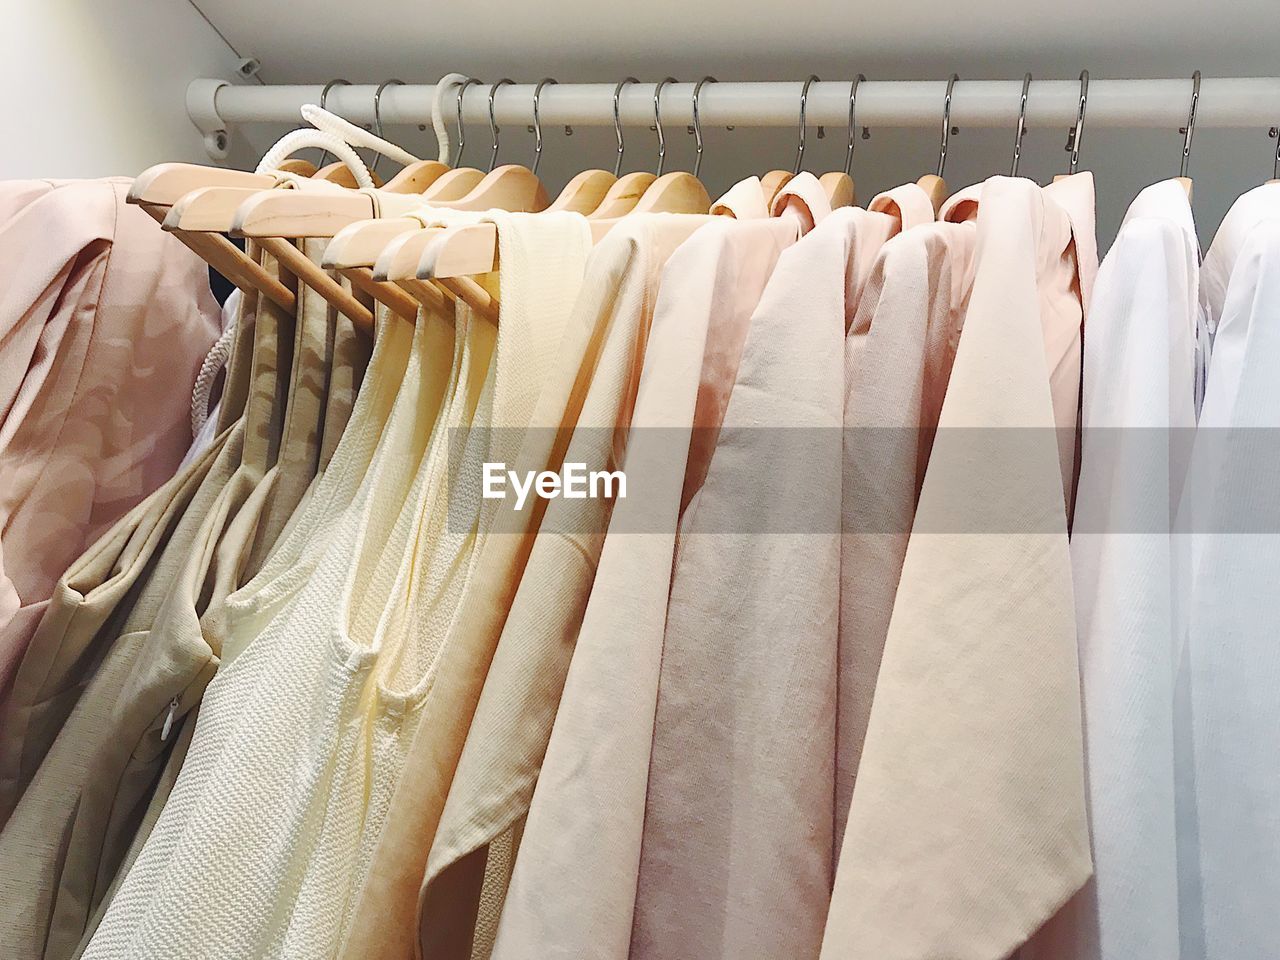 PANORAMIC VIEW OF CLOTHES HANGING AT STORE